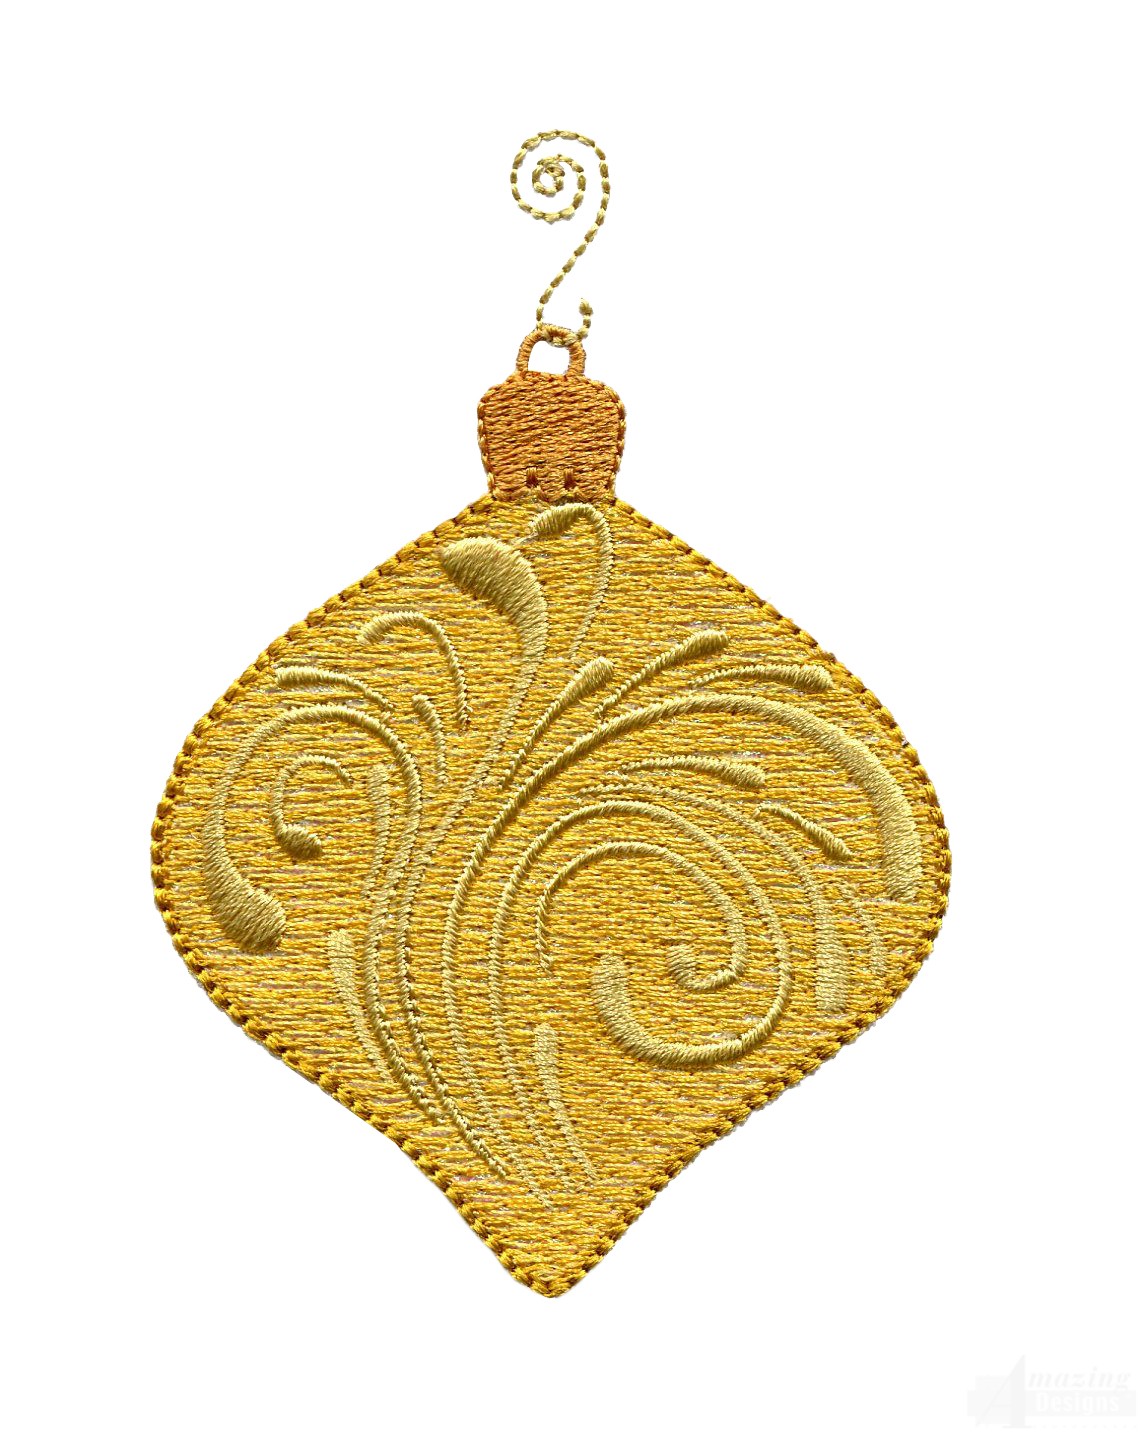 Gold Swirl Embroidery Designs